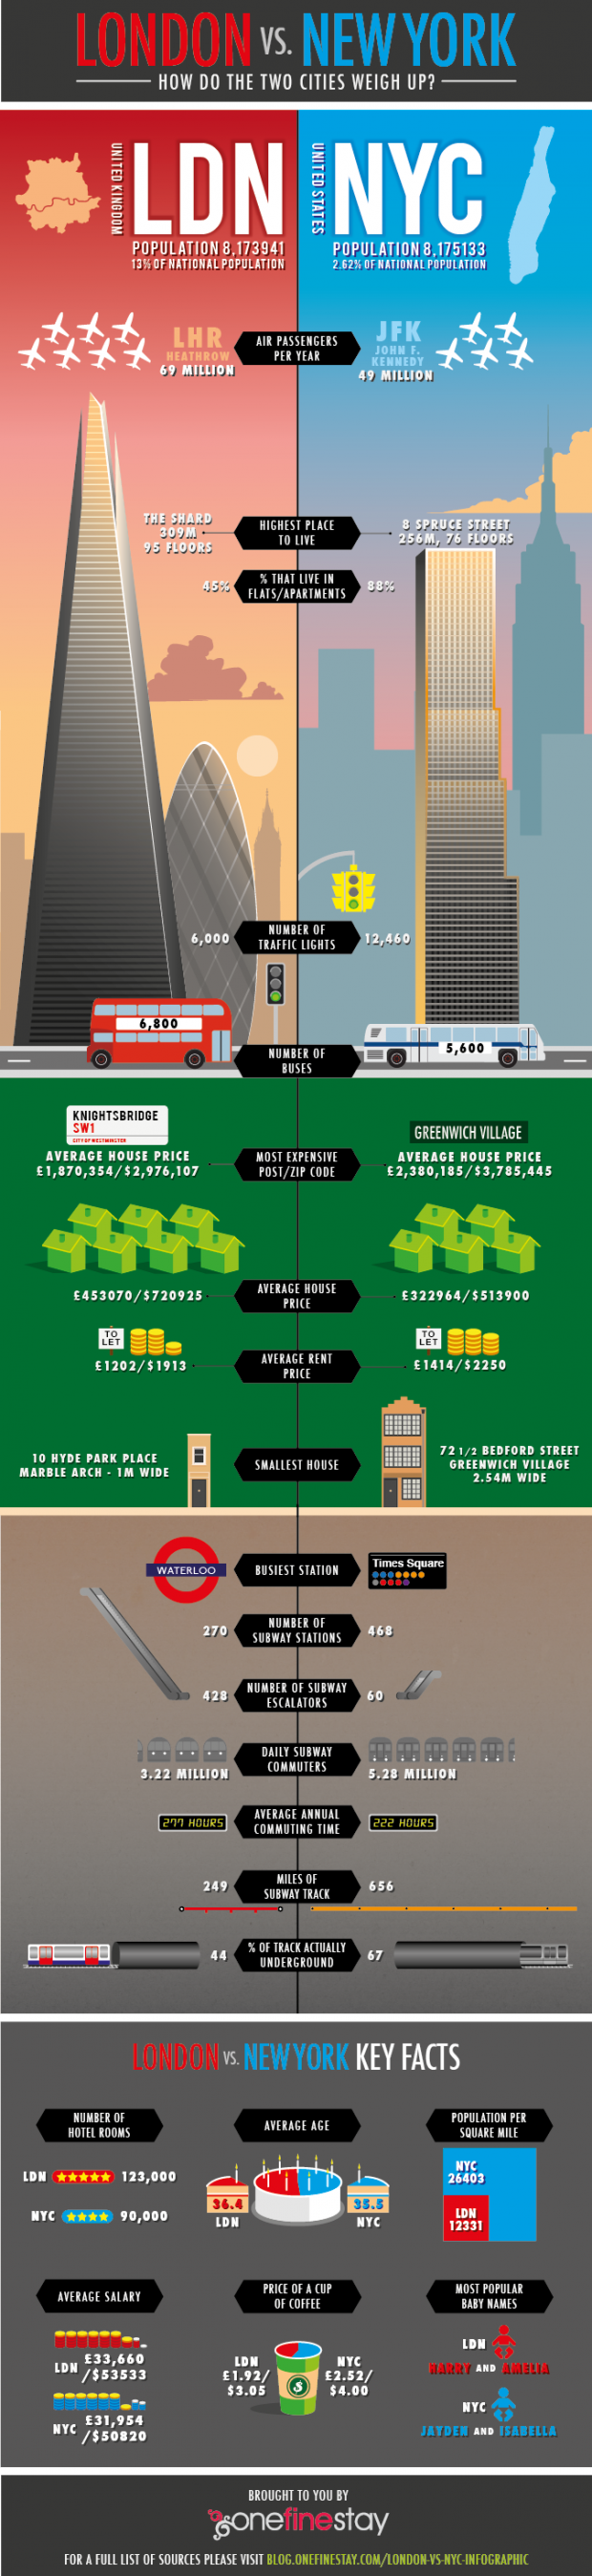 london-nyc-infographic-620x2697.png